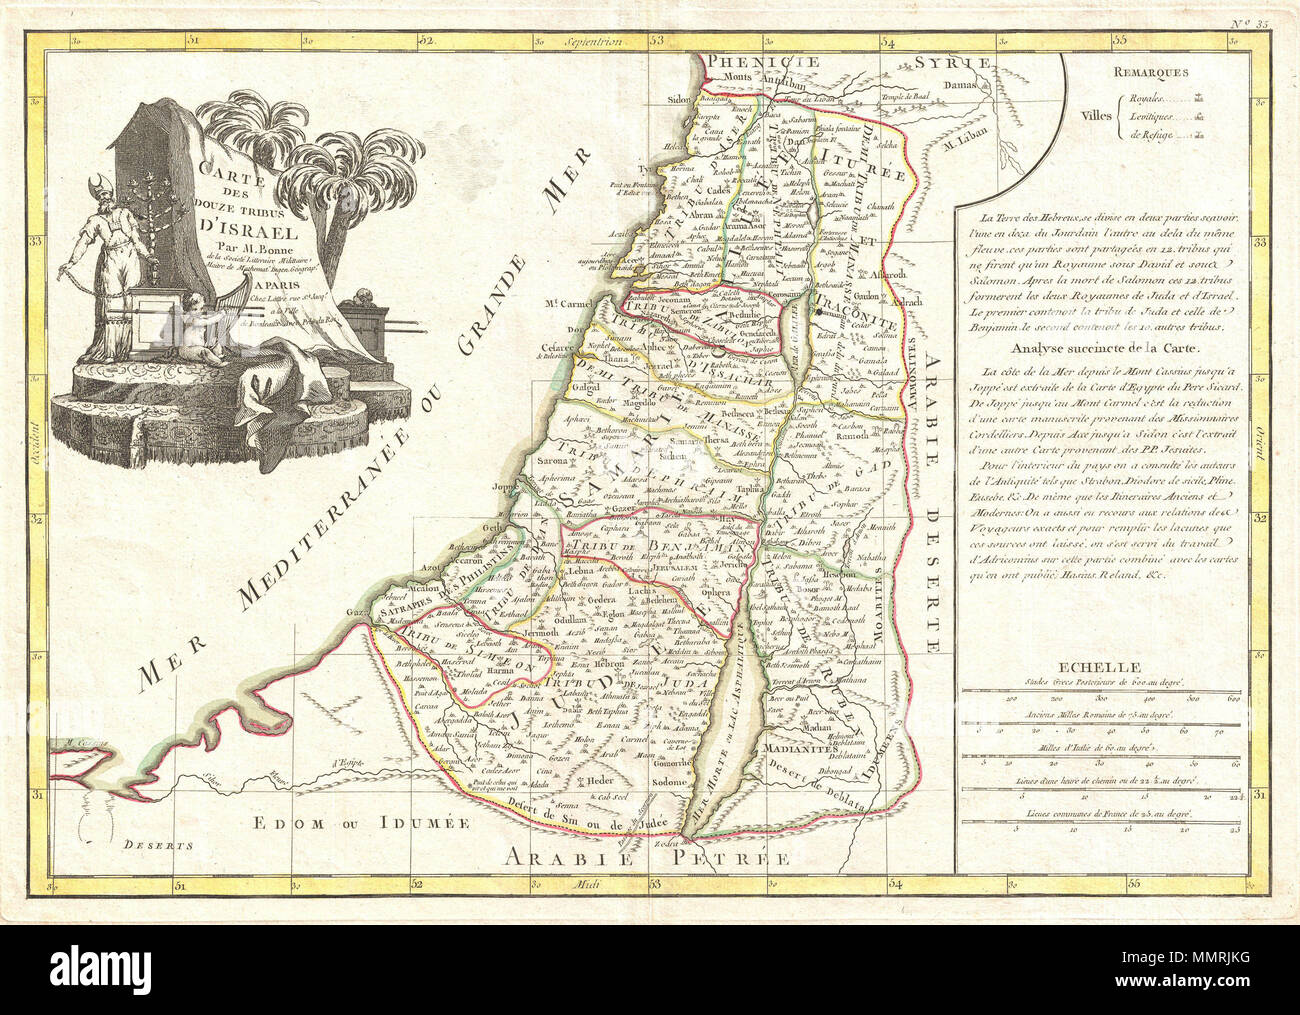 .  English: A beautiful example of Rigobert Bonne's c. 1770 decorative map of Israel or the Holy Land on both sides of the Jordan River. Covers the region as it existed in Biblical times with divisions for each of the Twelve Tribes of Israel. Notes on the construction of the map are featured in an inset on the right hand side of the page. The upper left quadrant features an decorative title cartouche featuring a menorah, a priest, a cherub, and what appears to be the Ark of the Covenant. Drawn by R. Bonne c. 1770 for issue as plate no. 35 in Jean Lattre's 1776 issue of the Atlas Moderne.  Cart Stock Photo